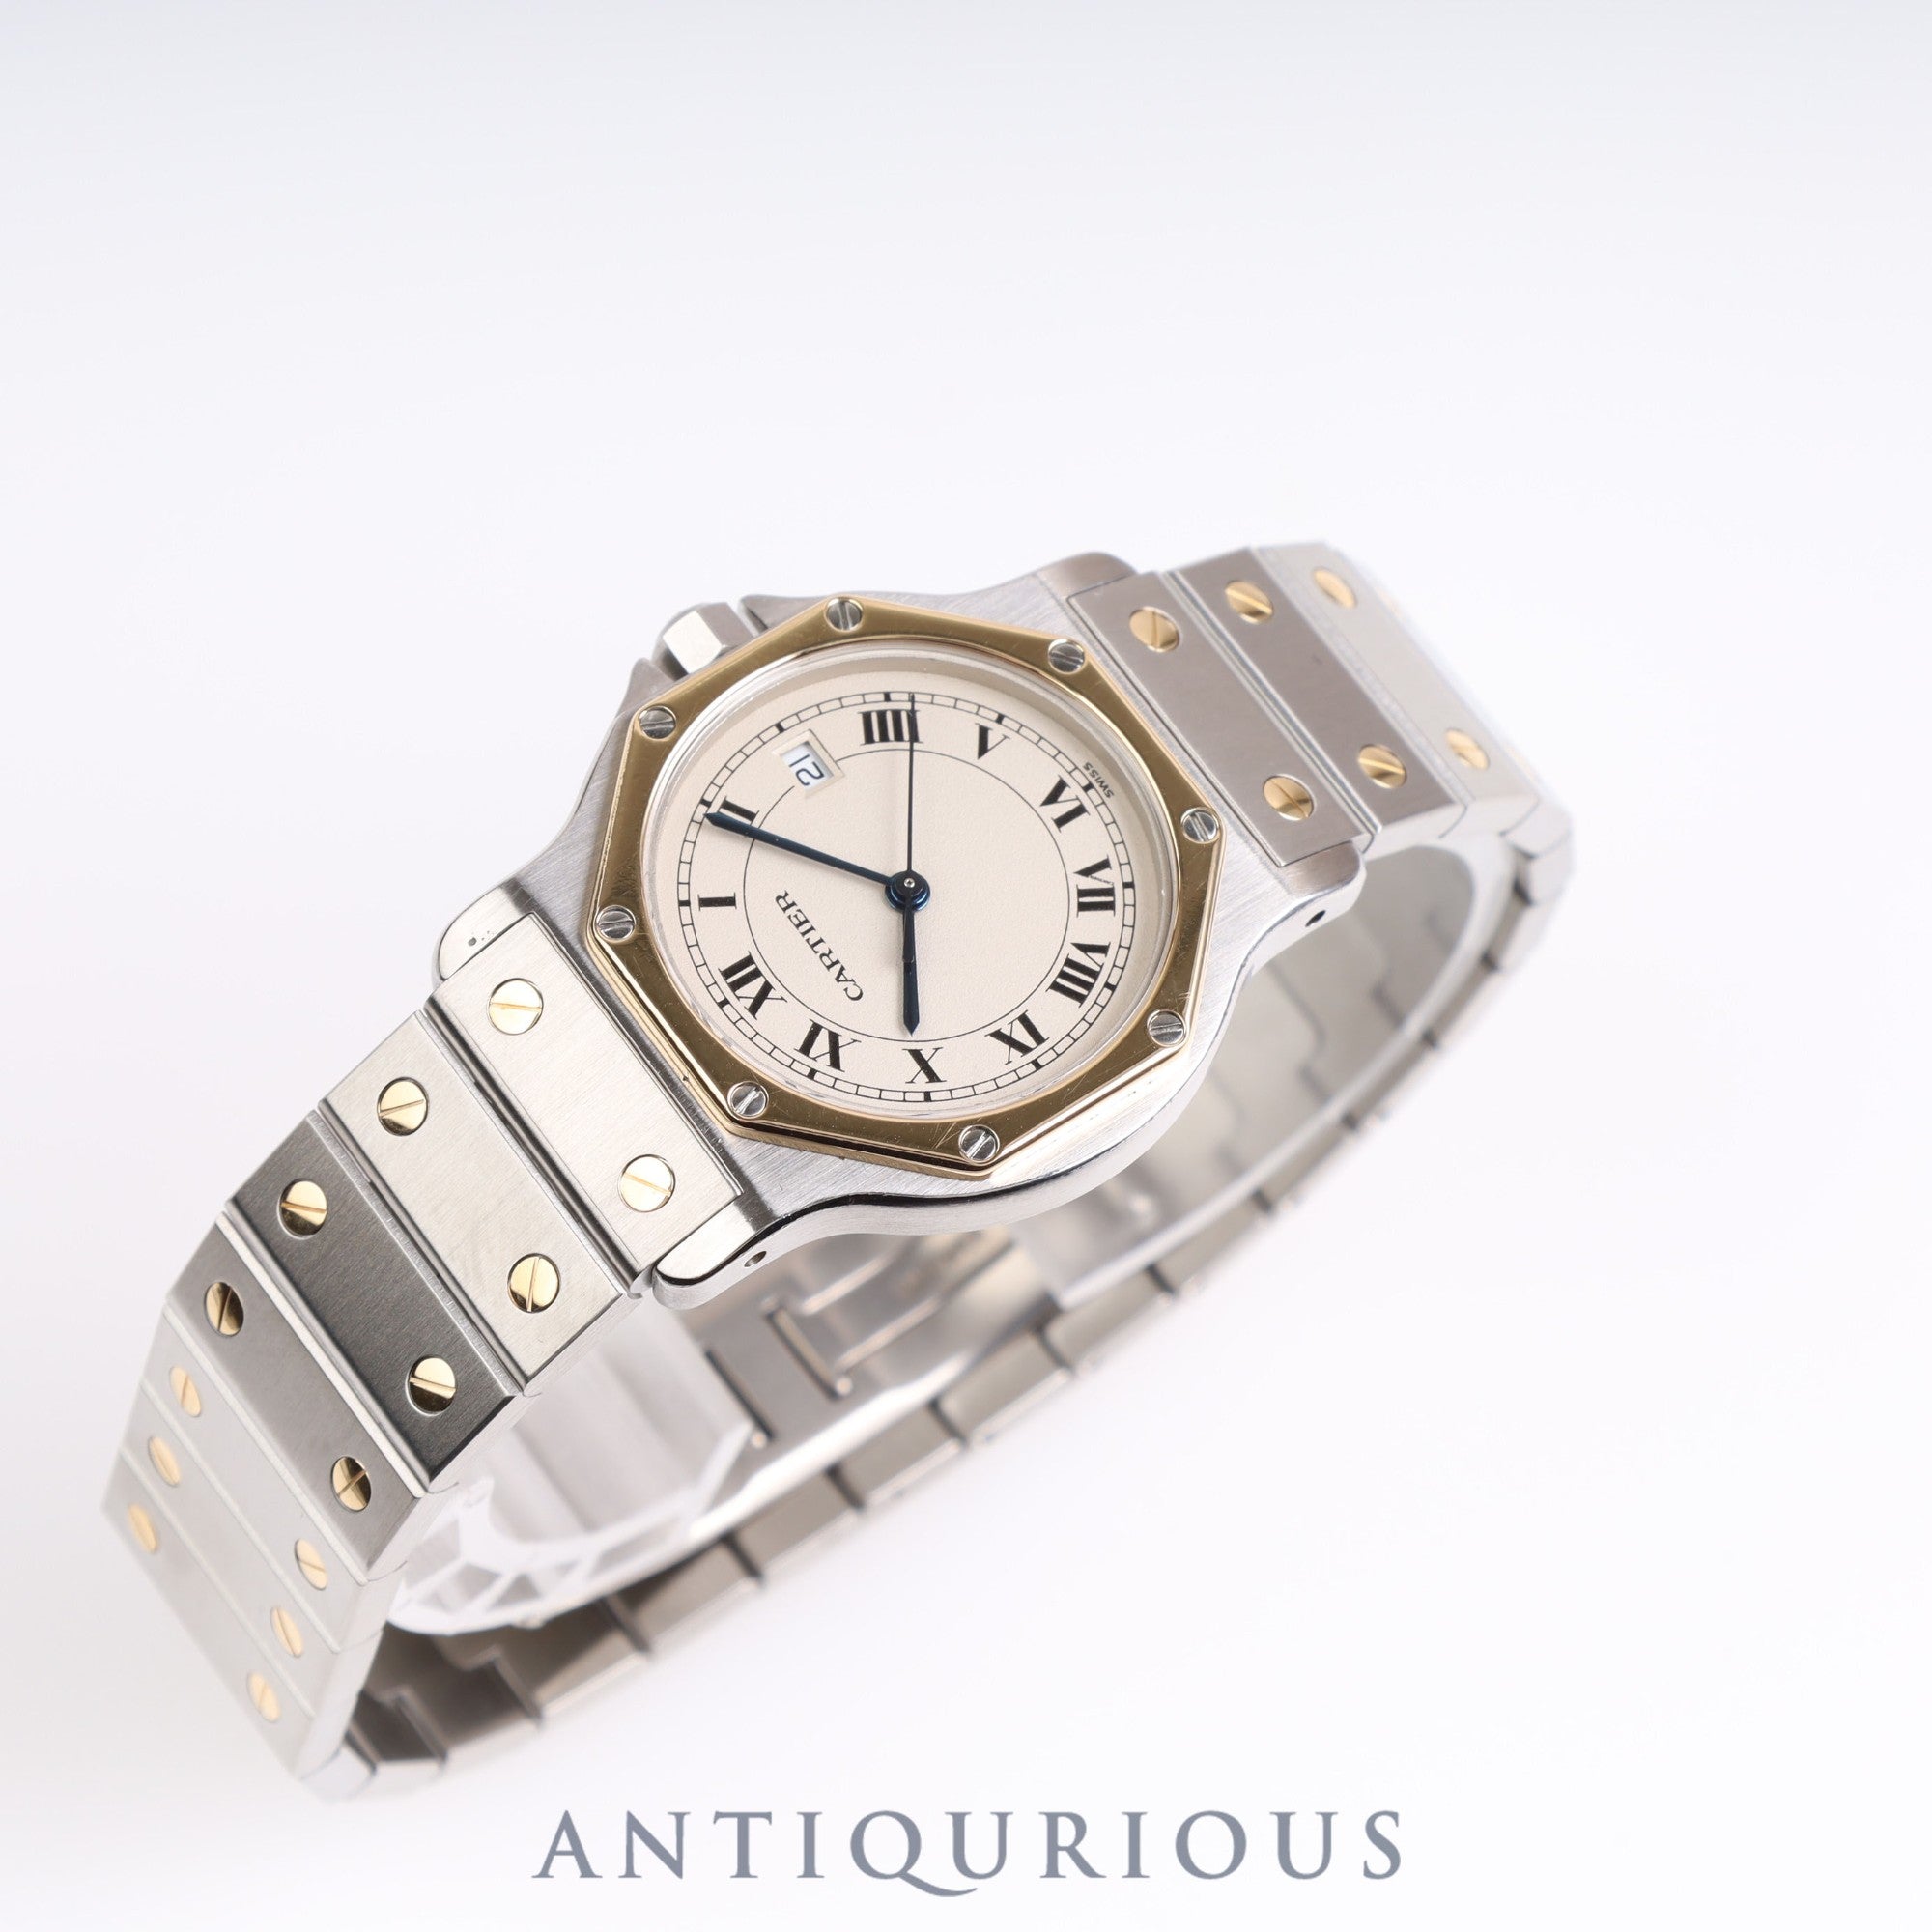 CARTIER SANTOS OCTAGON LM W2001583 Complete service completed